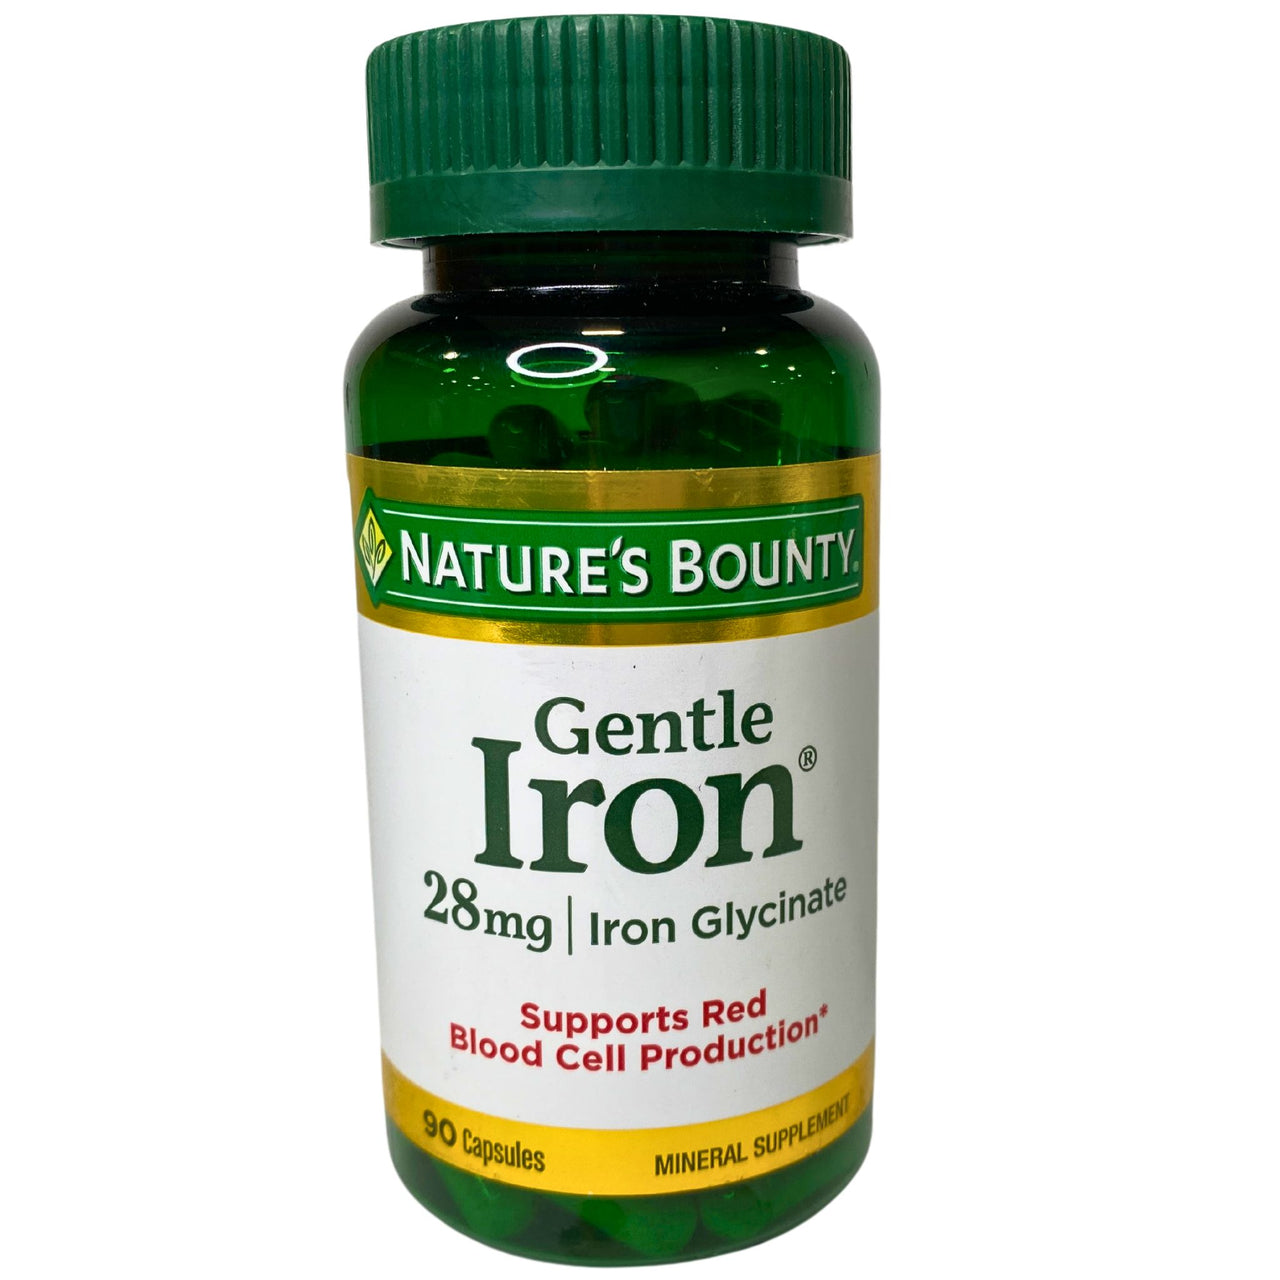 Gentle Iron 28mg Iron Glycinate Supports Red Blood Cell Production 